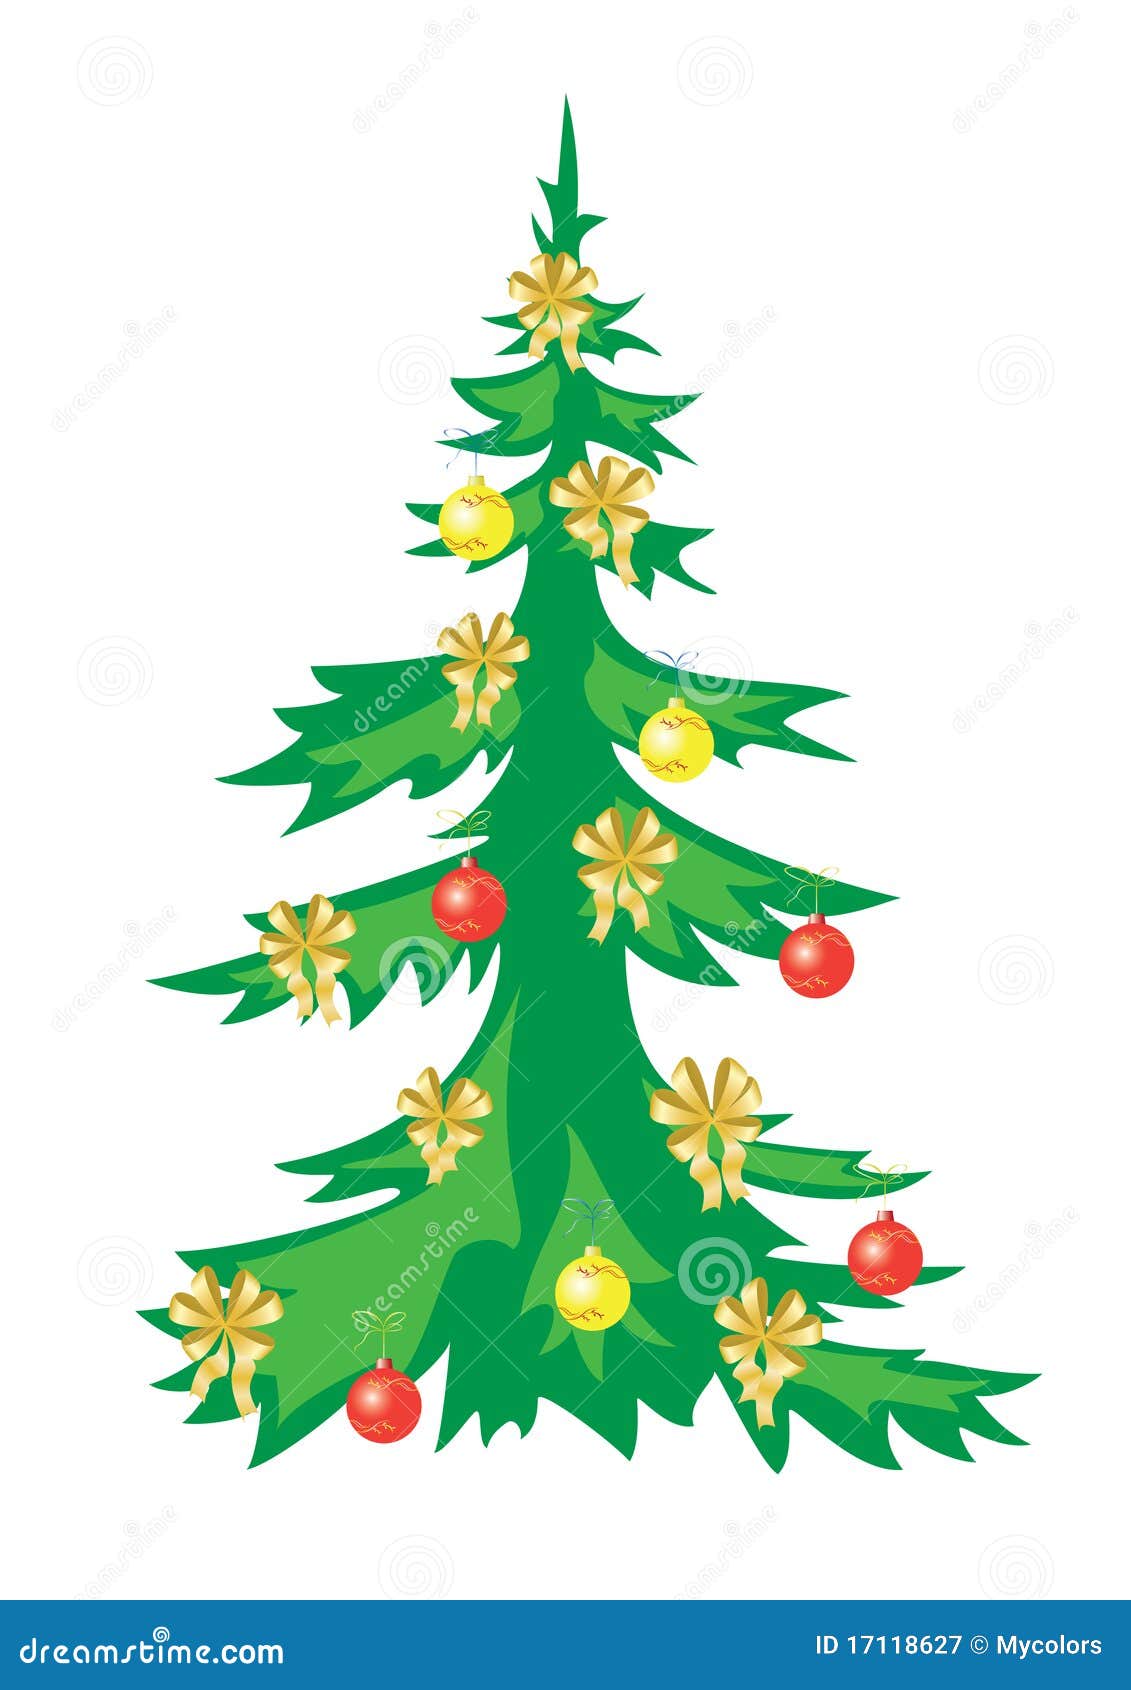 Christmas Vector Tree With Decorations Royalty Free Stock Photography ...